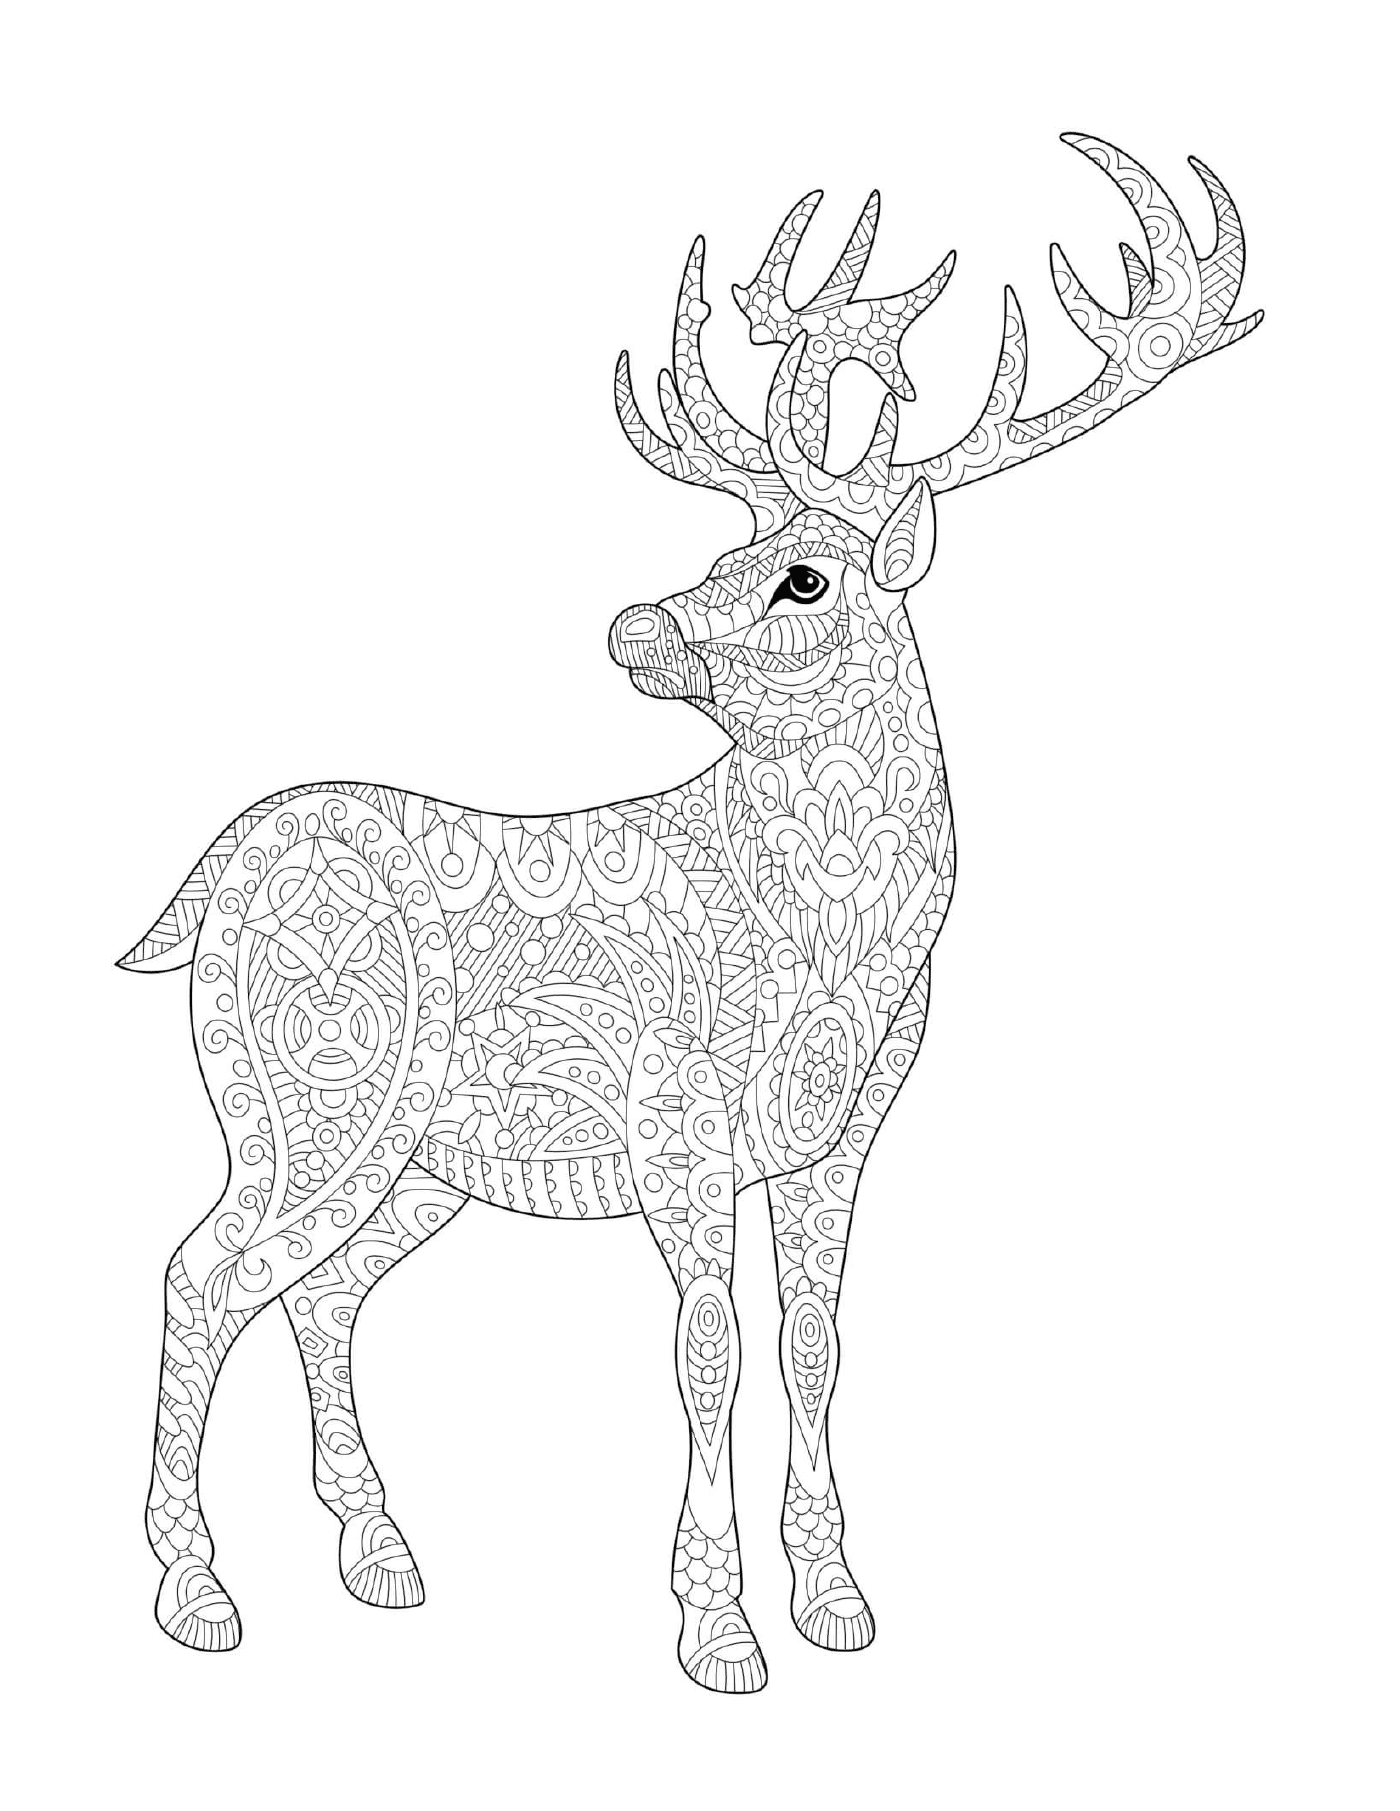  A reindeer with a perched bird 